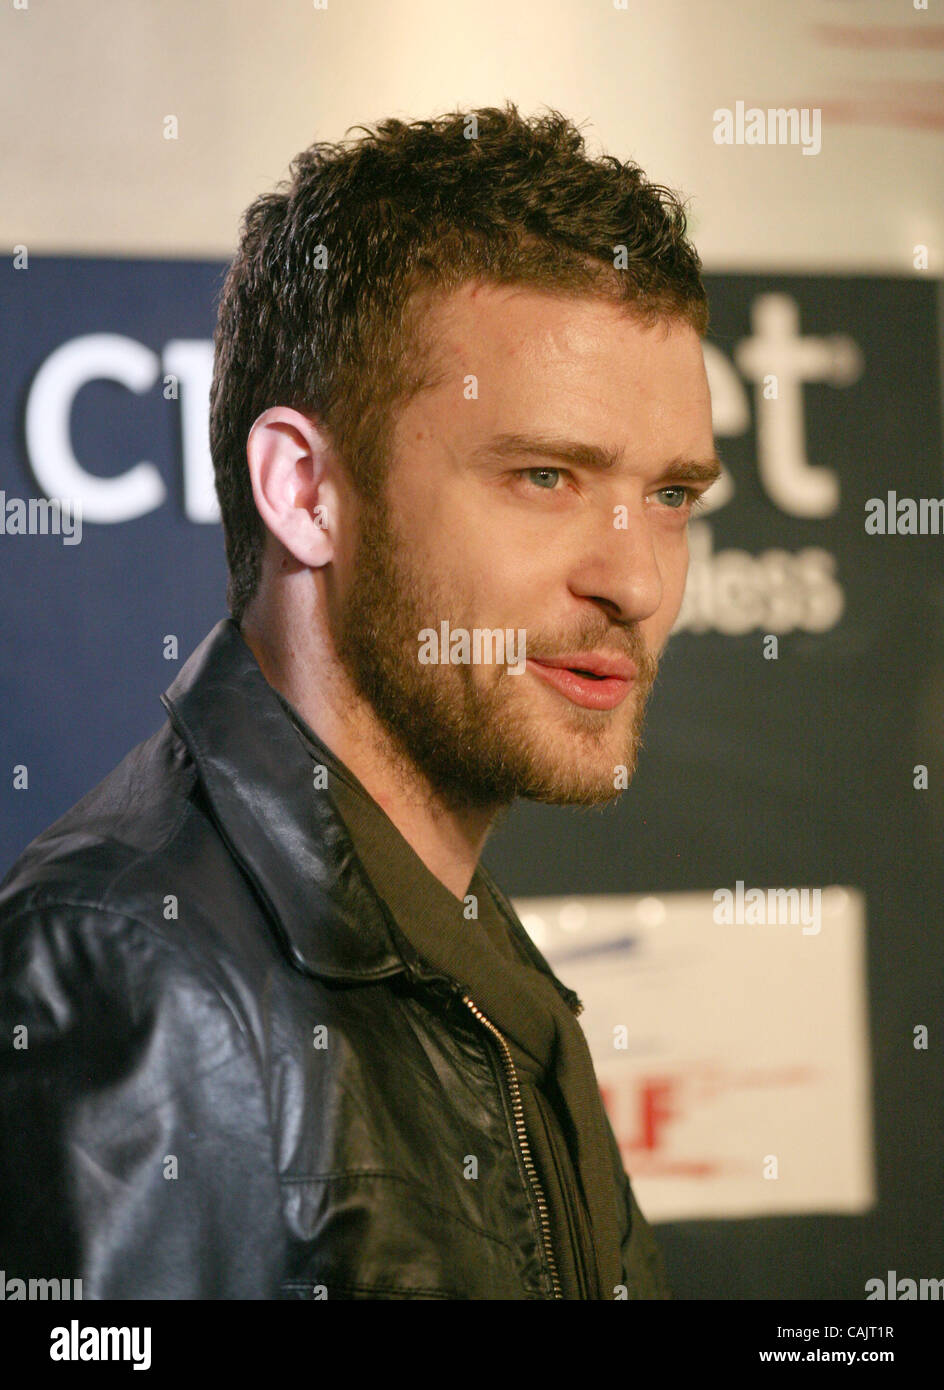 Sep 27, 2007 - Beverly Hills, CA, USA - Singer and Actor JUSTIN TIMBERLAKE at the Hollywood Celebrates 18 Declare Yourself event. The Declare Yourself campaign focuses on getting young Americans to register to vote for the 2008 elections. (Credit Image: © Marianna Day Massey/ZUMA Press) Stock Photo